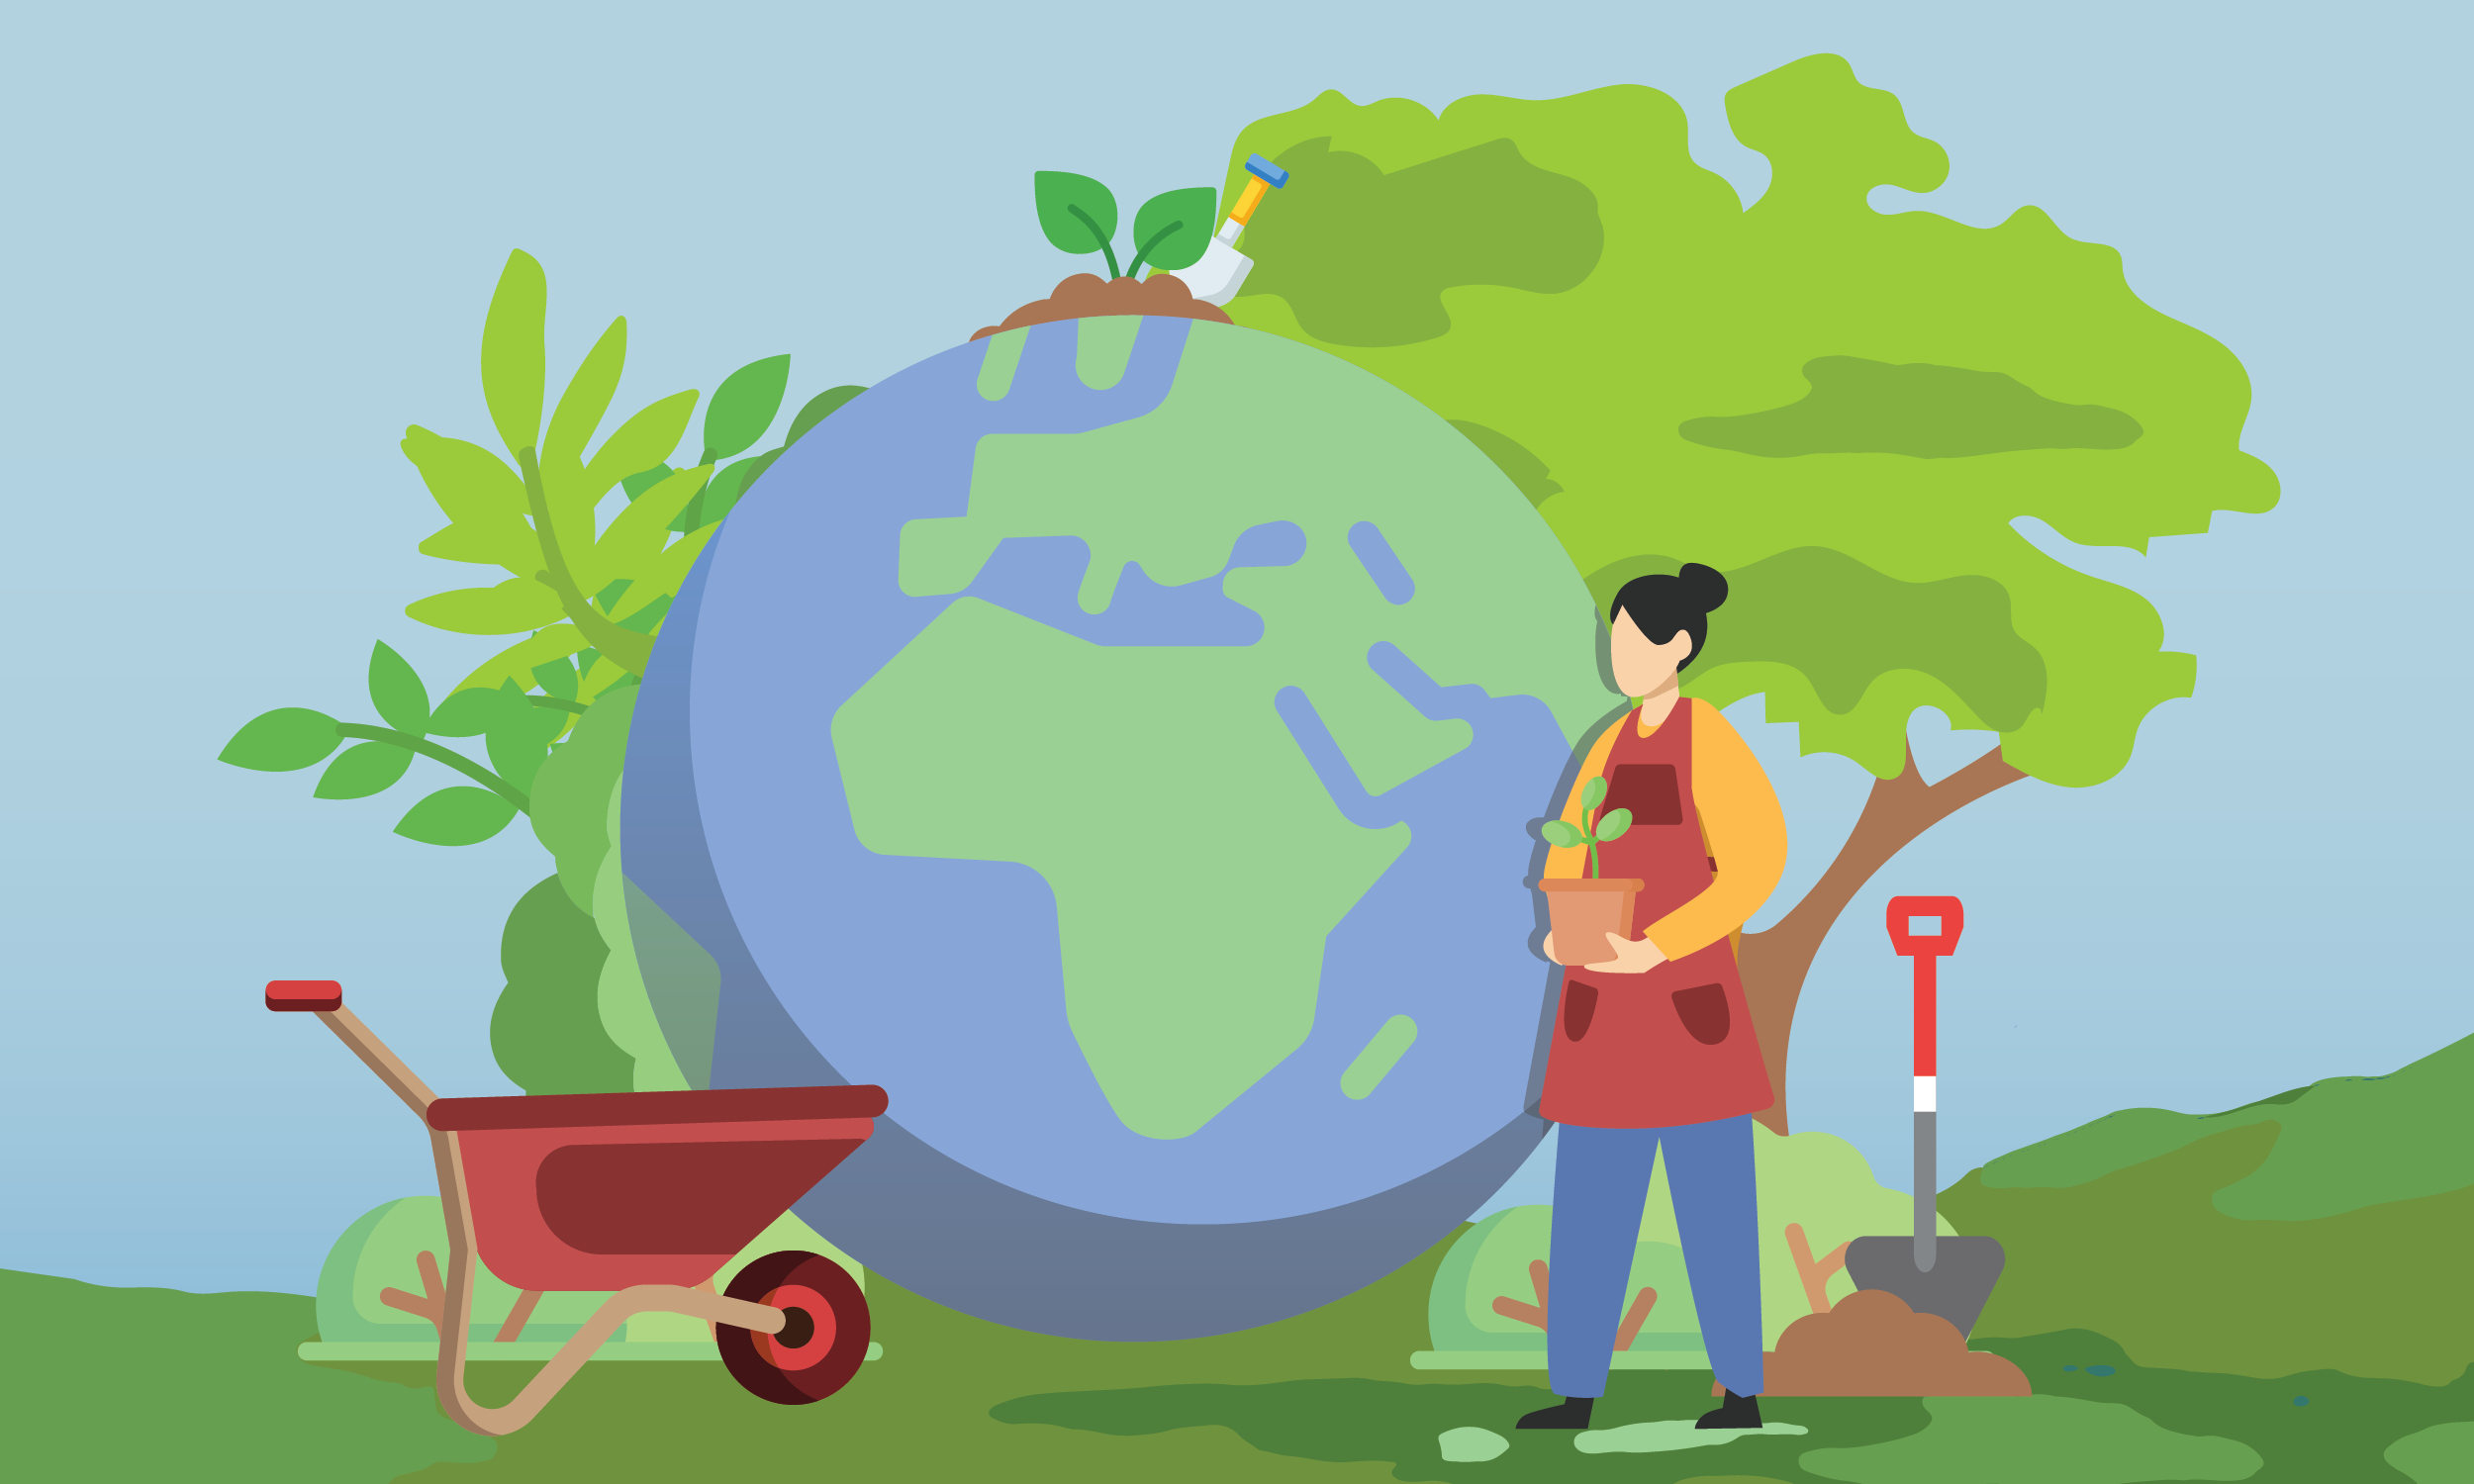 cover image showing woman holding potted plant next to globe